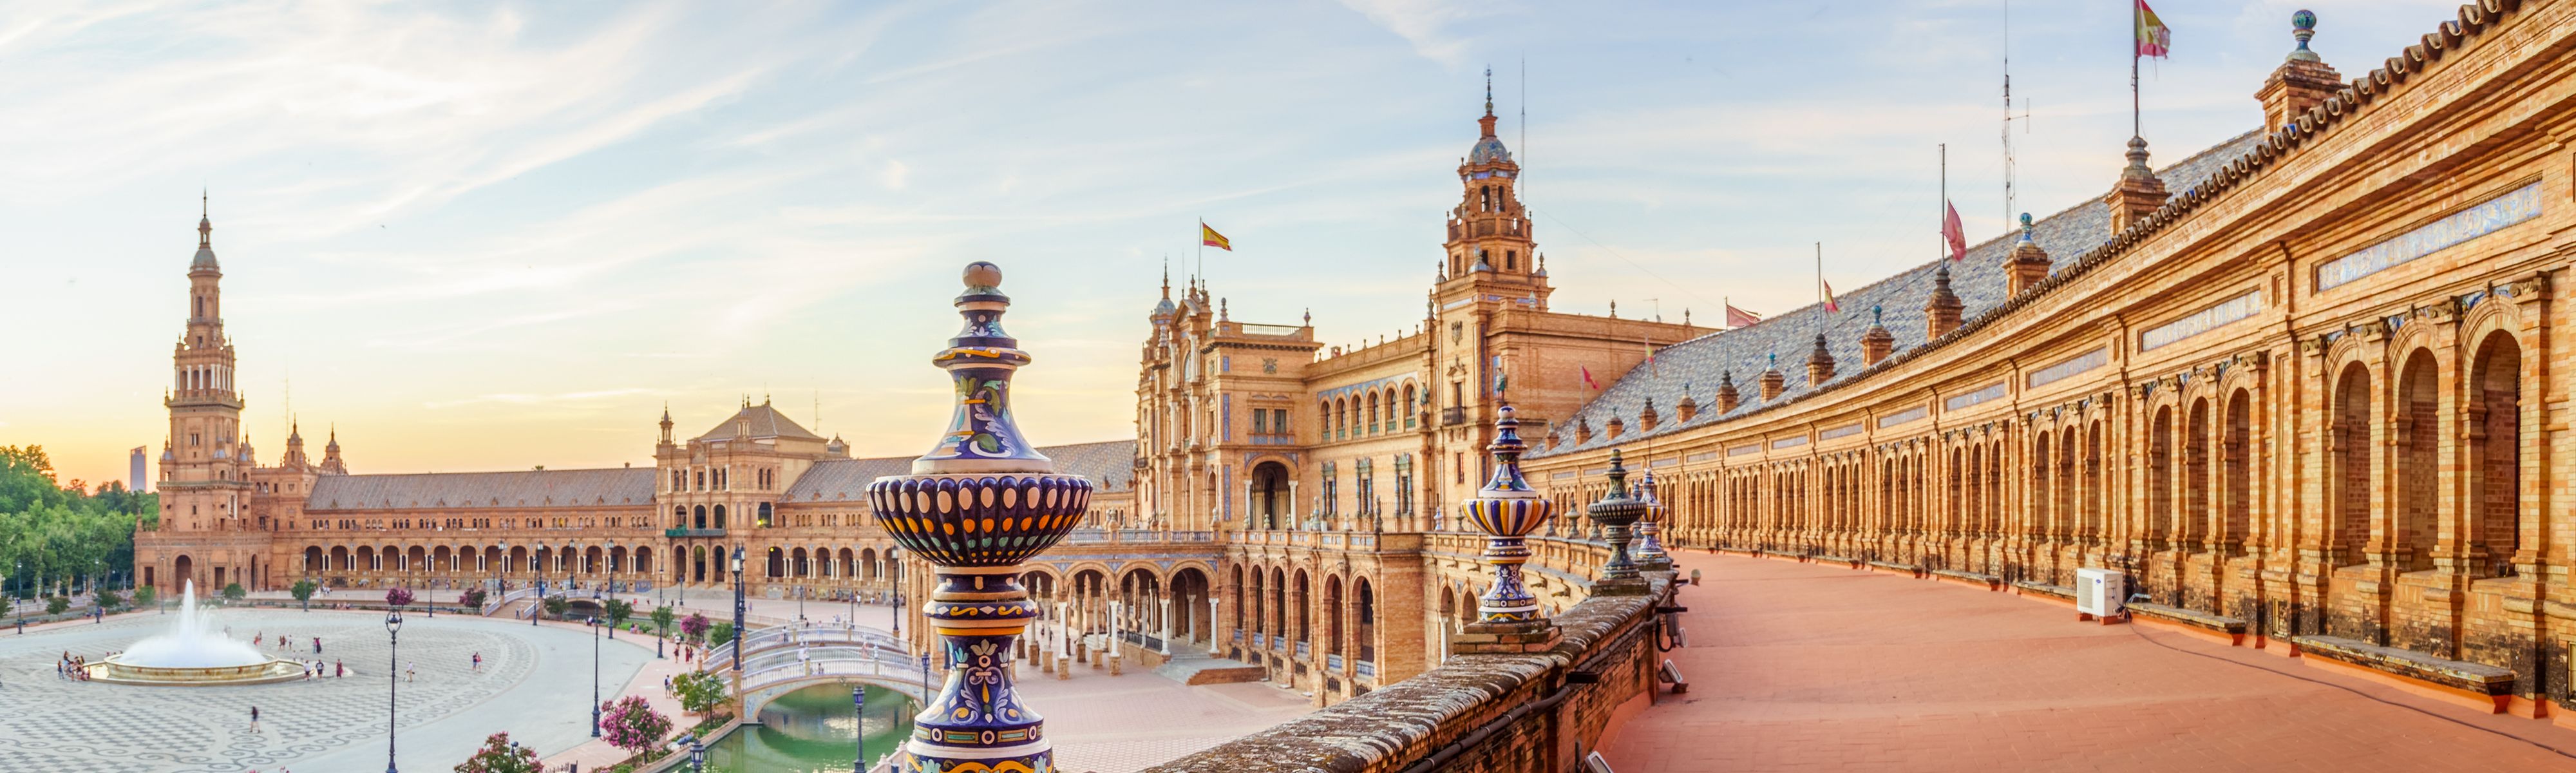 Barcelona Madrid And Seville Ef Go Ahead Tours